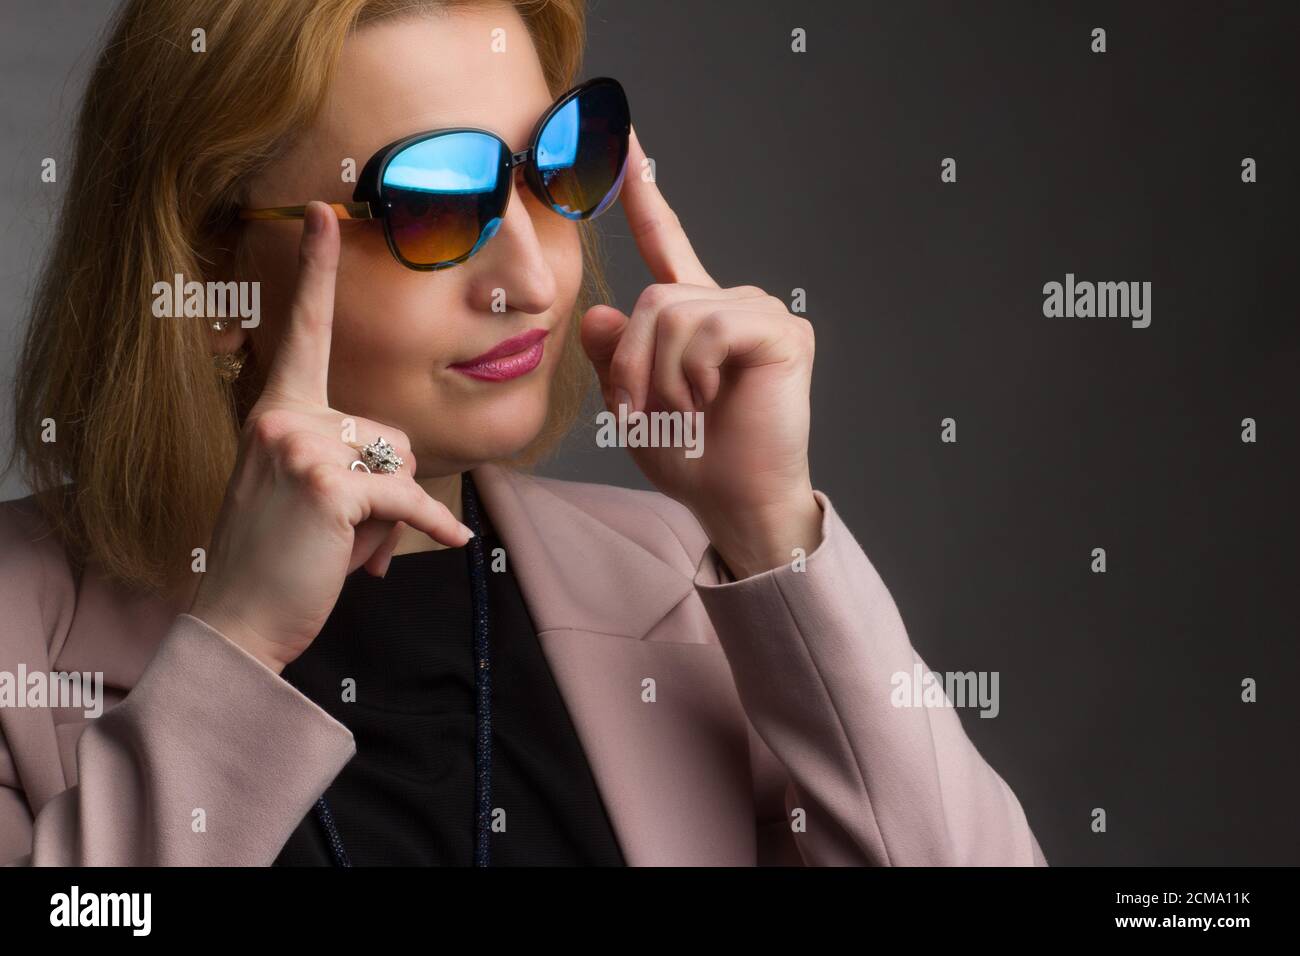 An overweight adult woman wearing sunglasses and black and pink clothing. Studio portrait on a black background Stock Photo